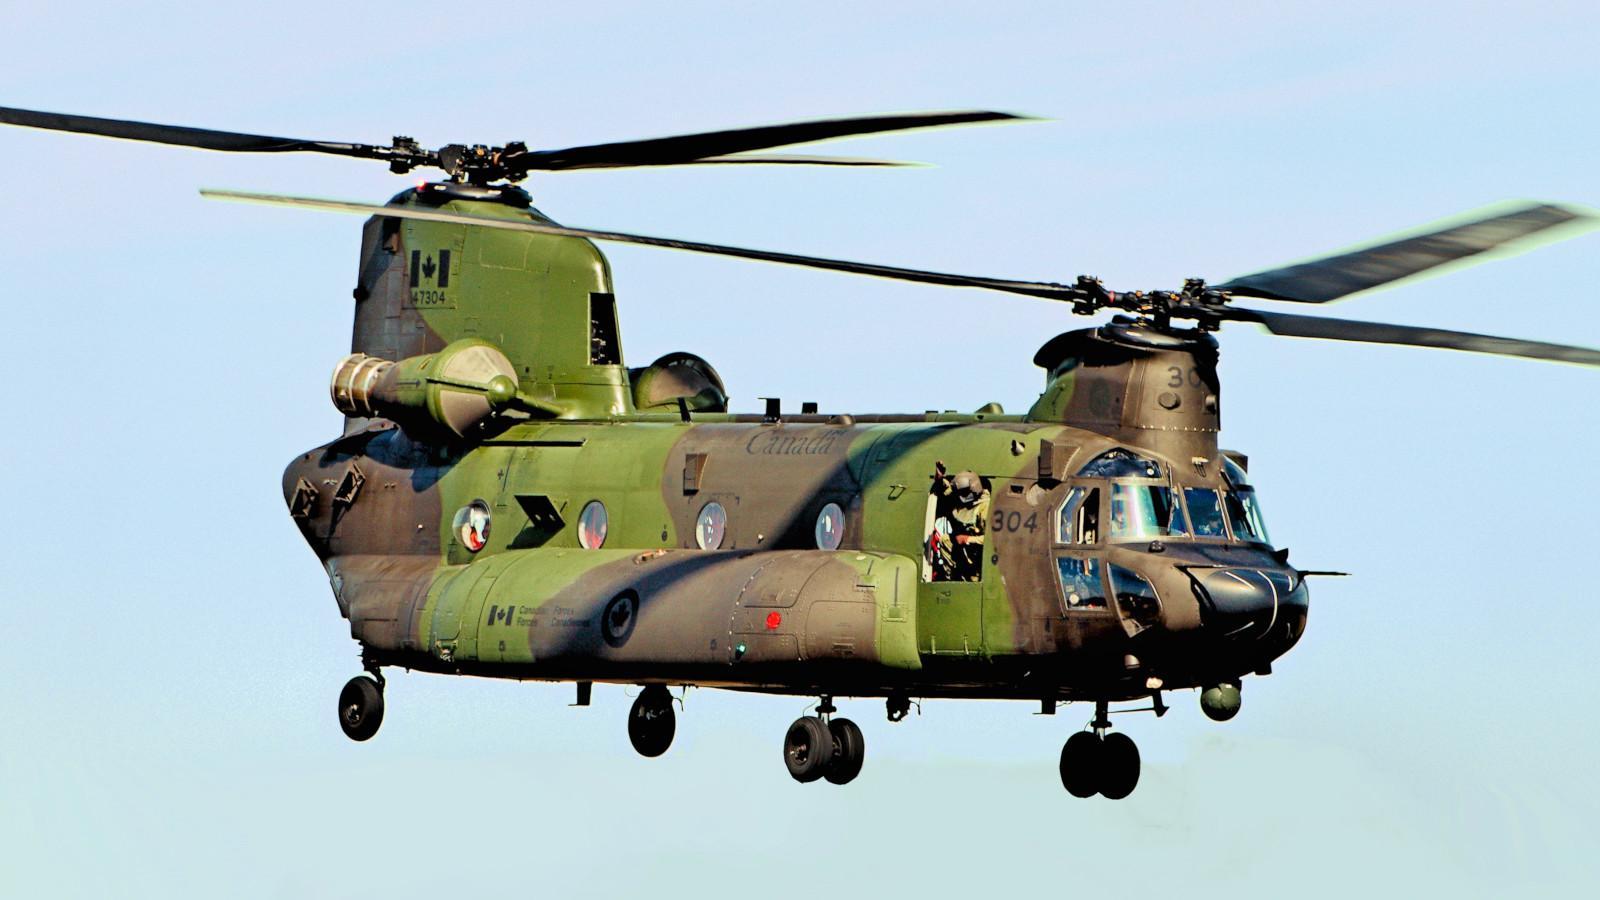 Philippines In Talks For CH-47, Eyes KF-21 For Future Acquisition